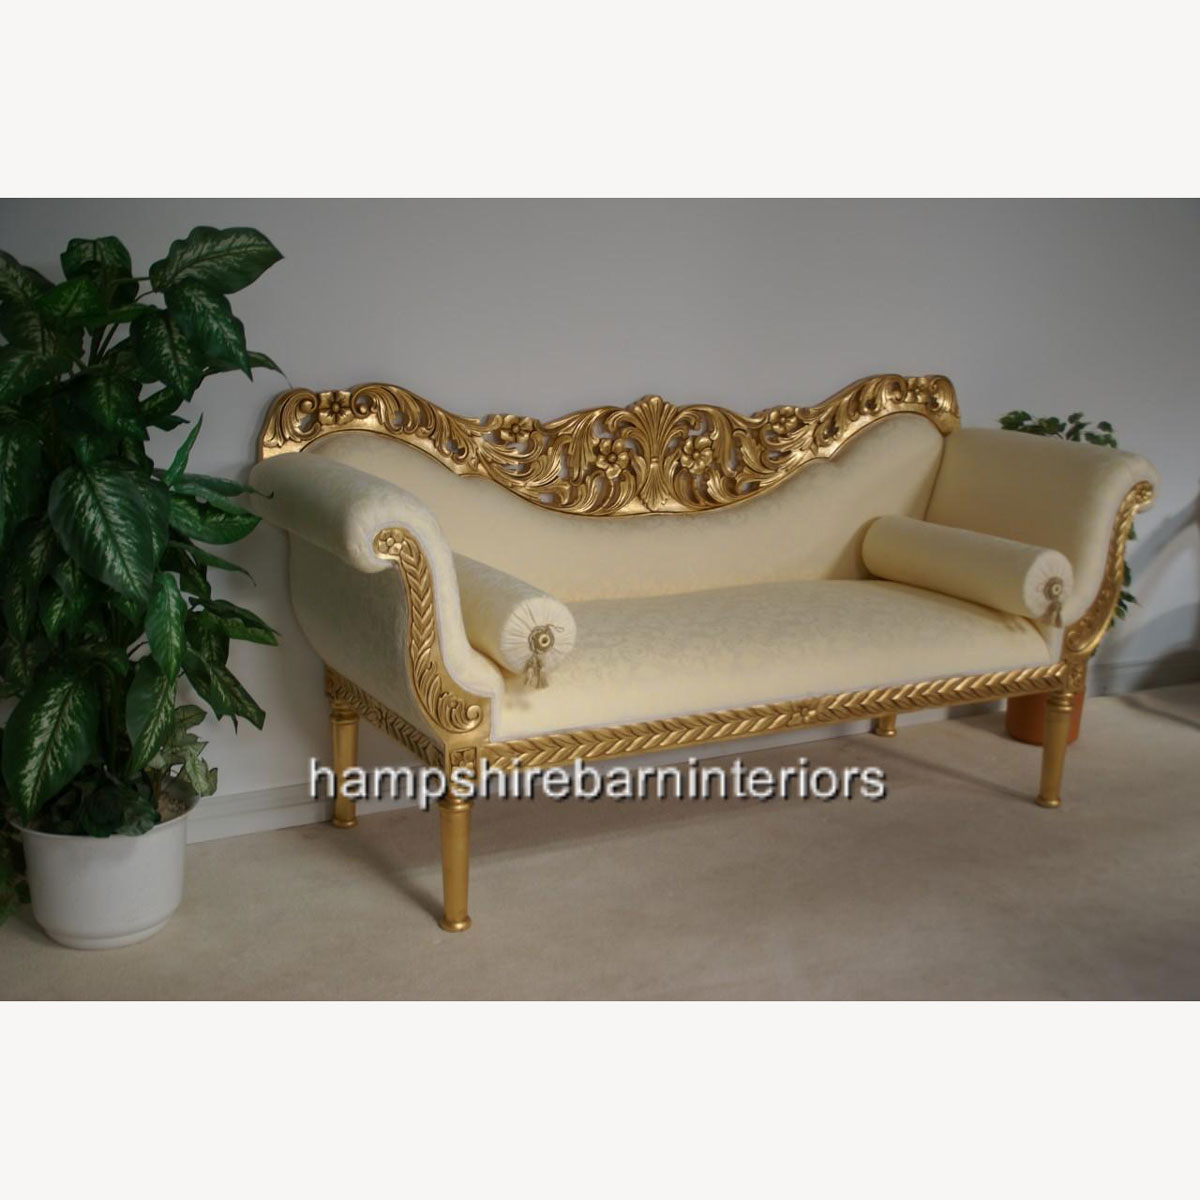 A Prianka 3 Piece Wedding Set Sofa Plus Two Chairs In Gold Leaf And Cream Optional Separate Stools Available 6 - Hampshire Barn Interiors - A Prianka 3 Piece Wedding Set (Sofa Plus Two Chairs) In Gold Leaf And Cream (Optional Separate Stools Available) -